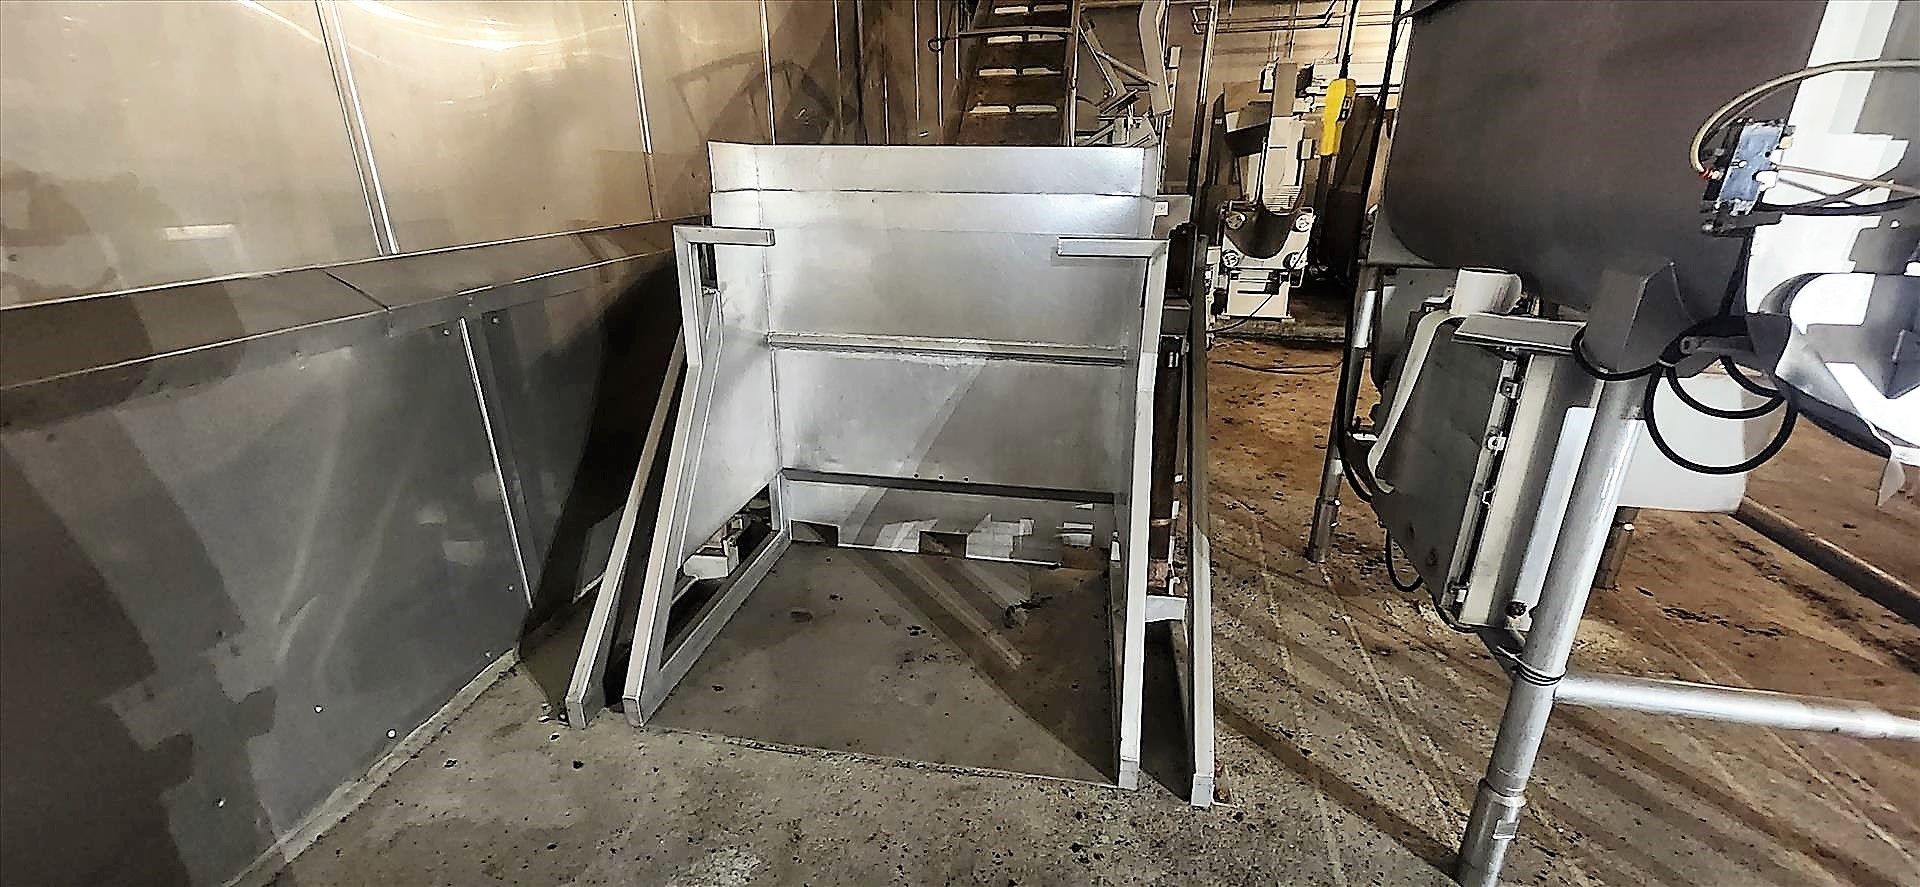 tote dumper, stainless steel, approx. 48 in. x 54 in. x 50 in. pivot point c/w 5 hp hydraulic